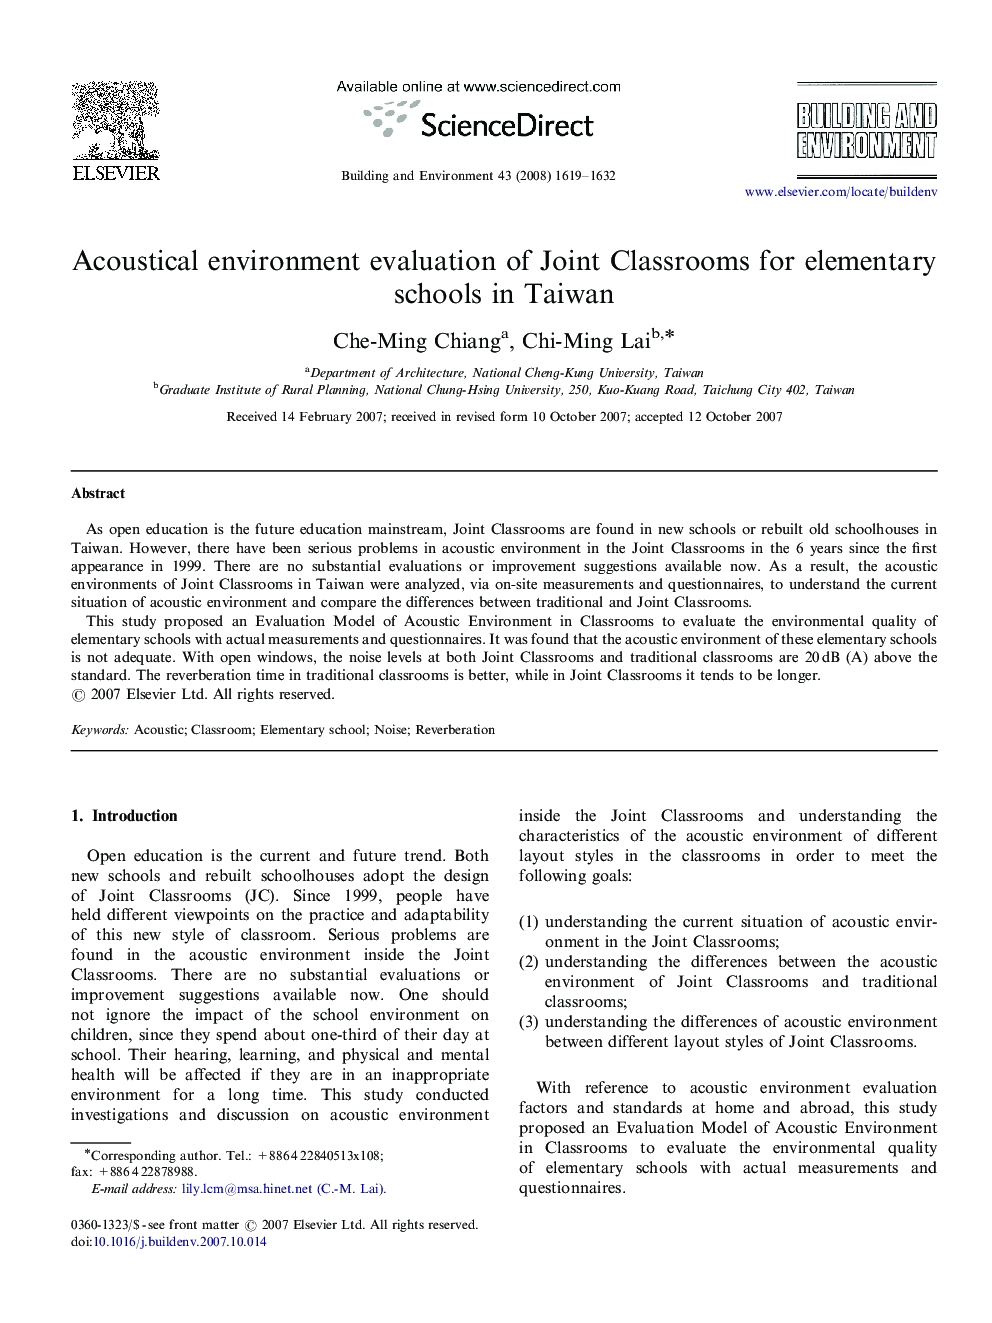 Acoustical environment evaluation of Joint Classrooms for elementary schools in Taiwan